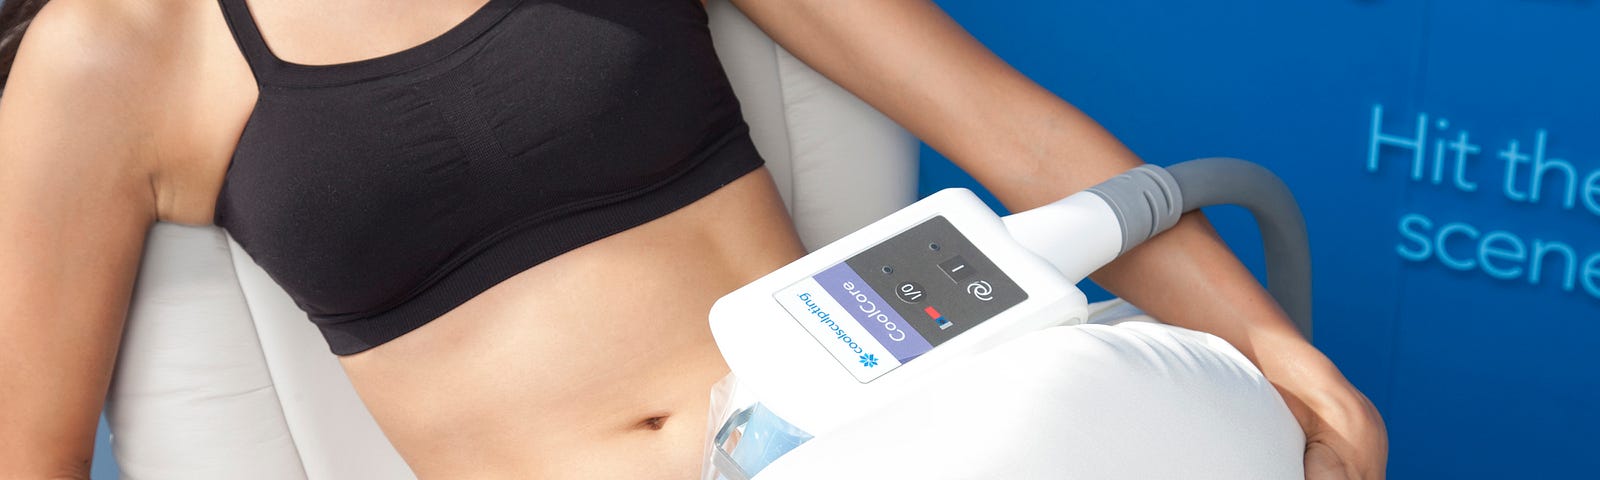 5 Signs You Need CoolSculpting.